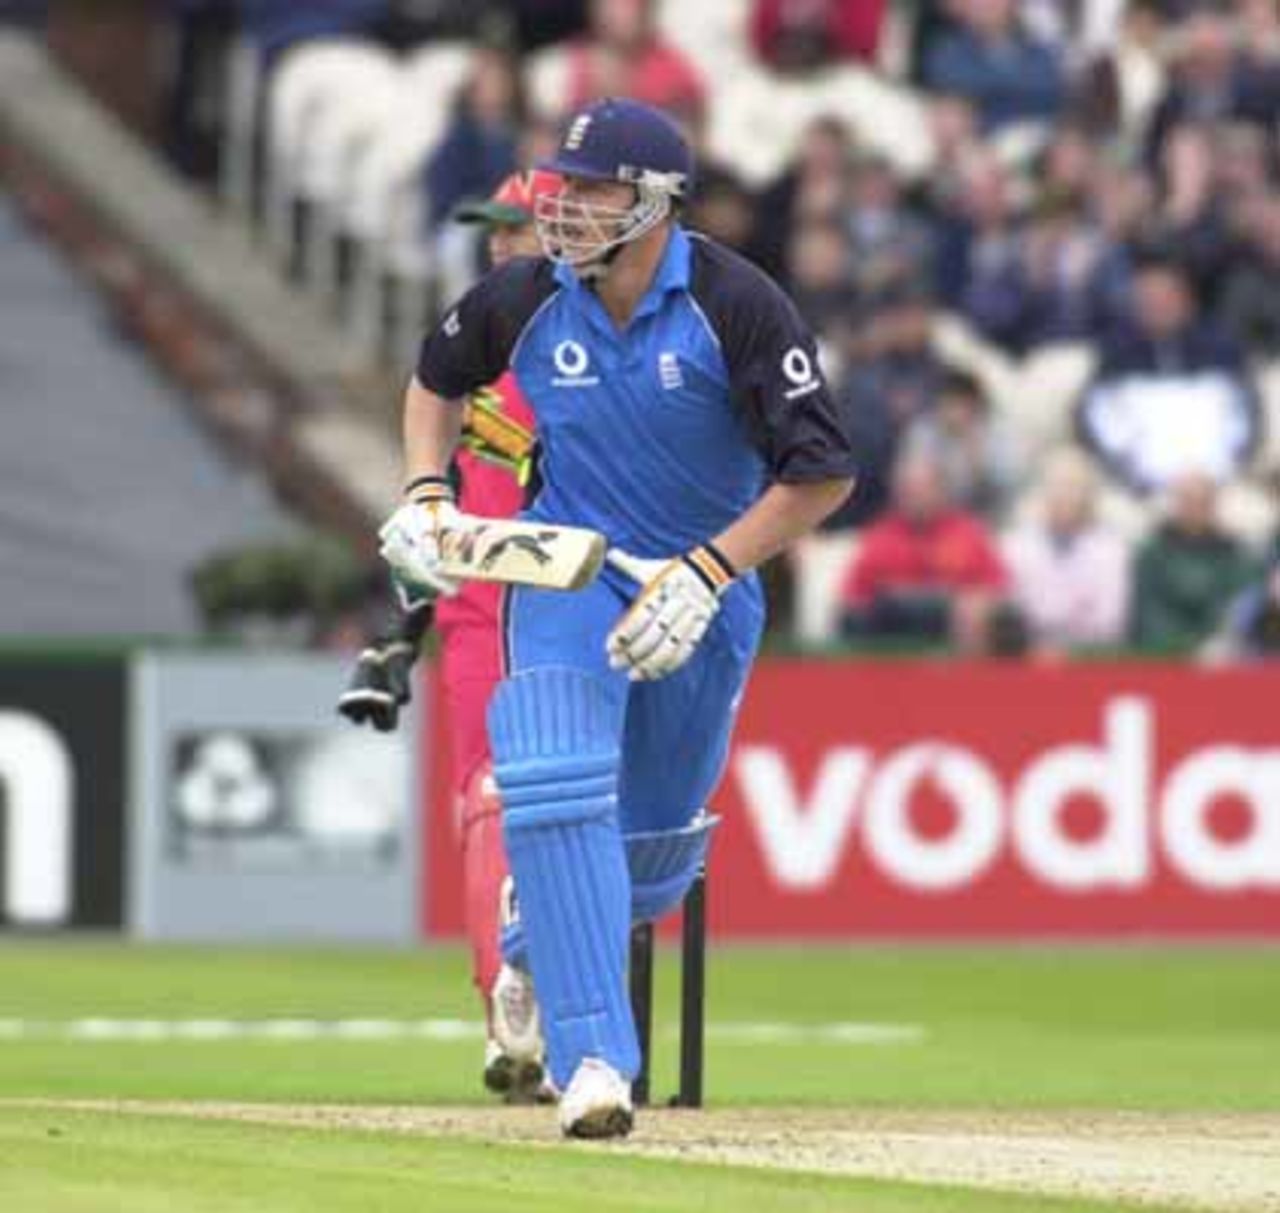 In the Nat West ODI series 2000; England v Zimbabwe, Manchester